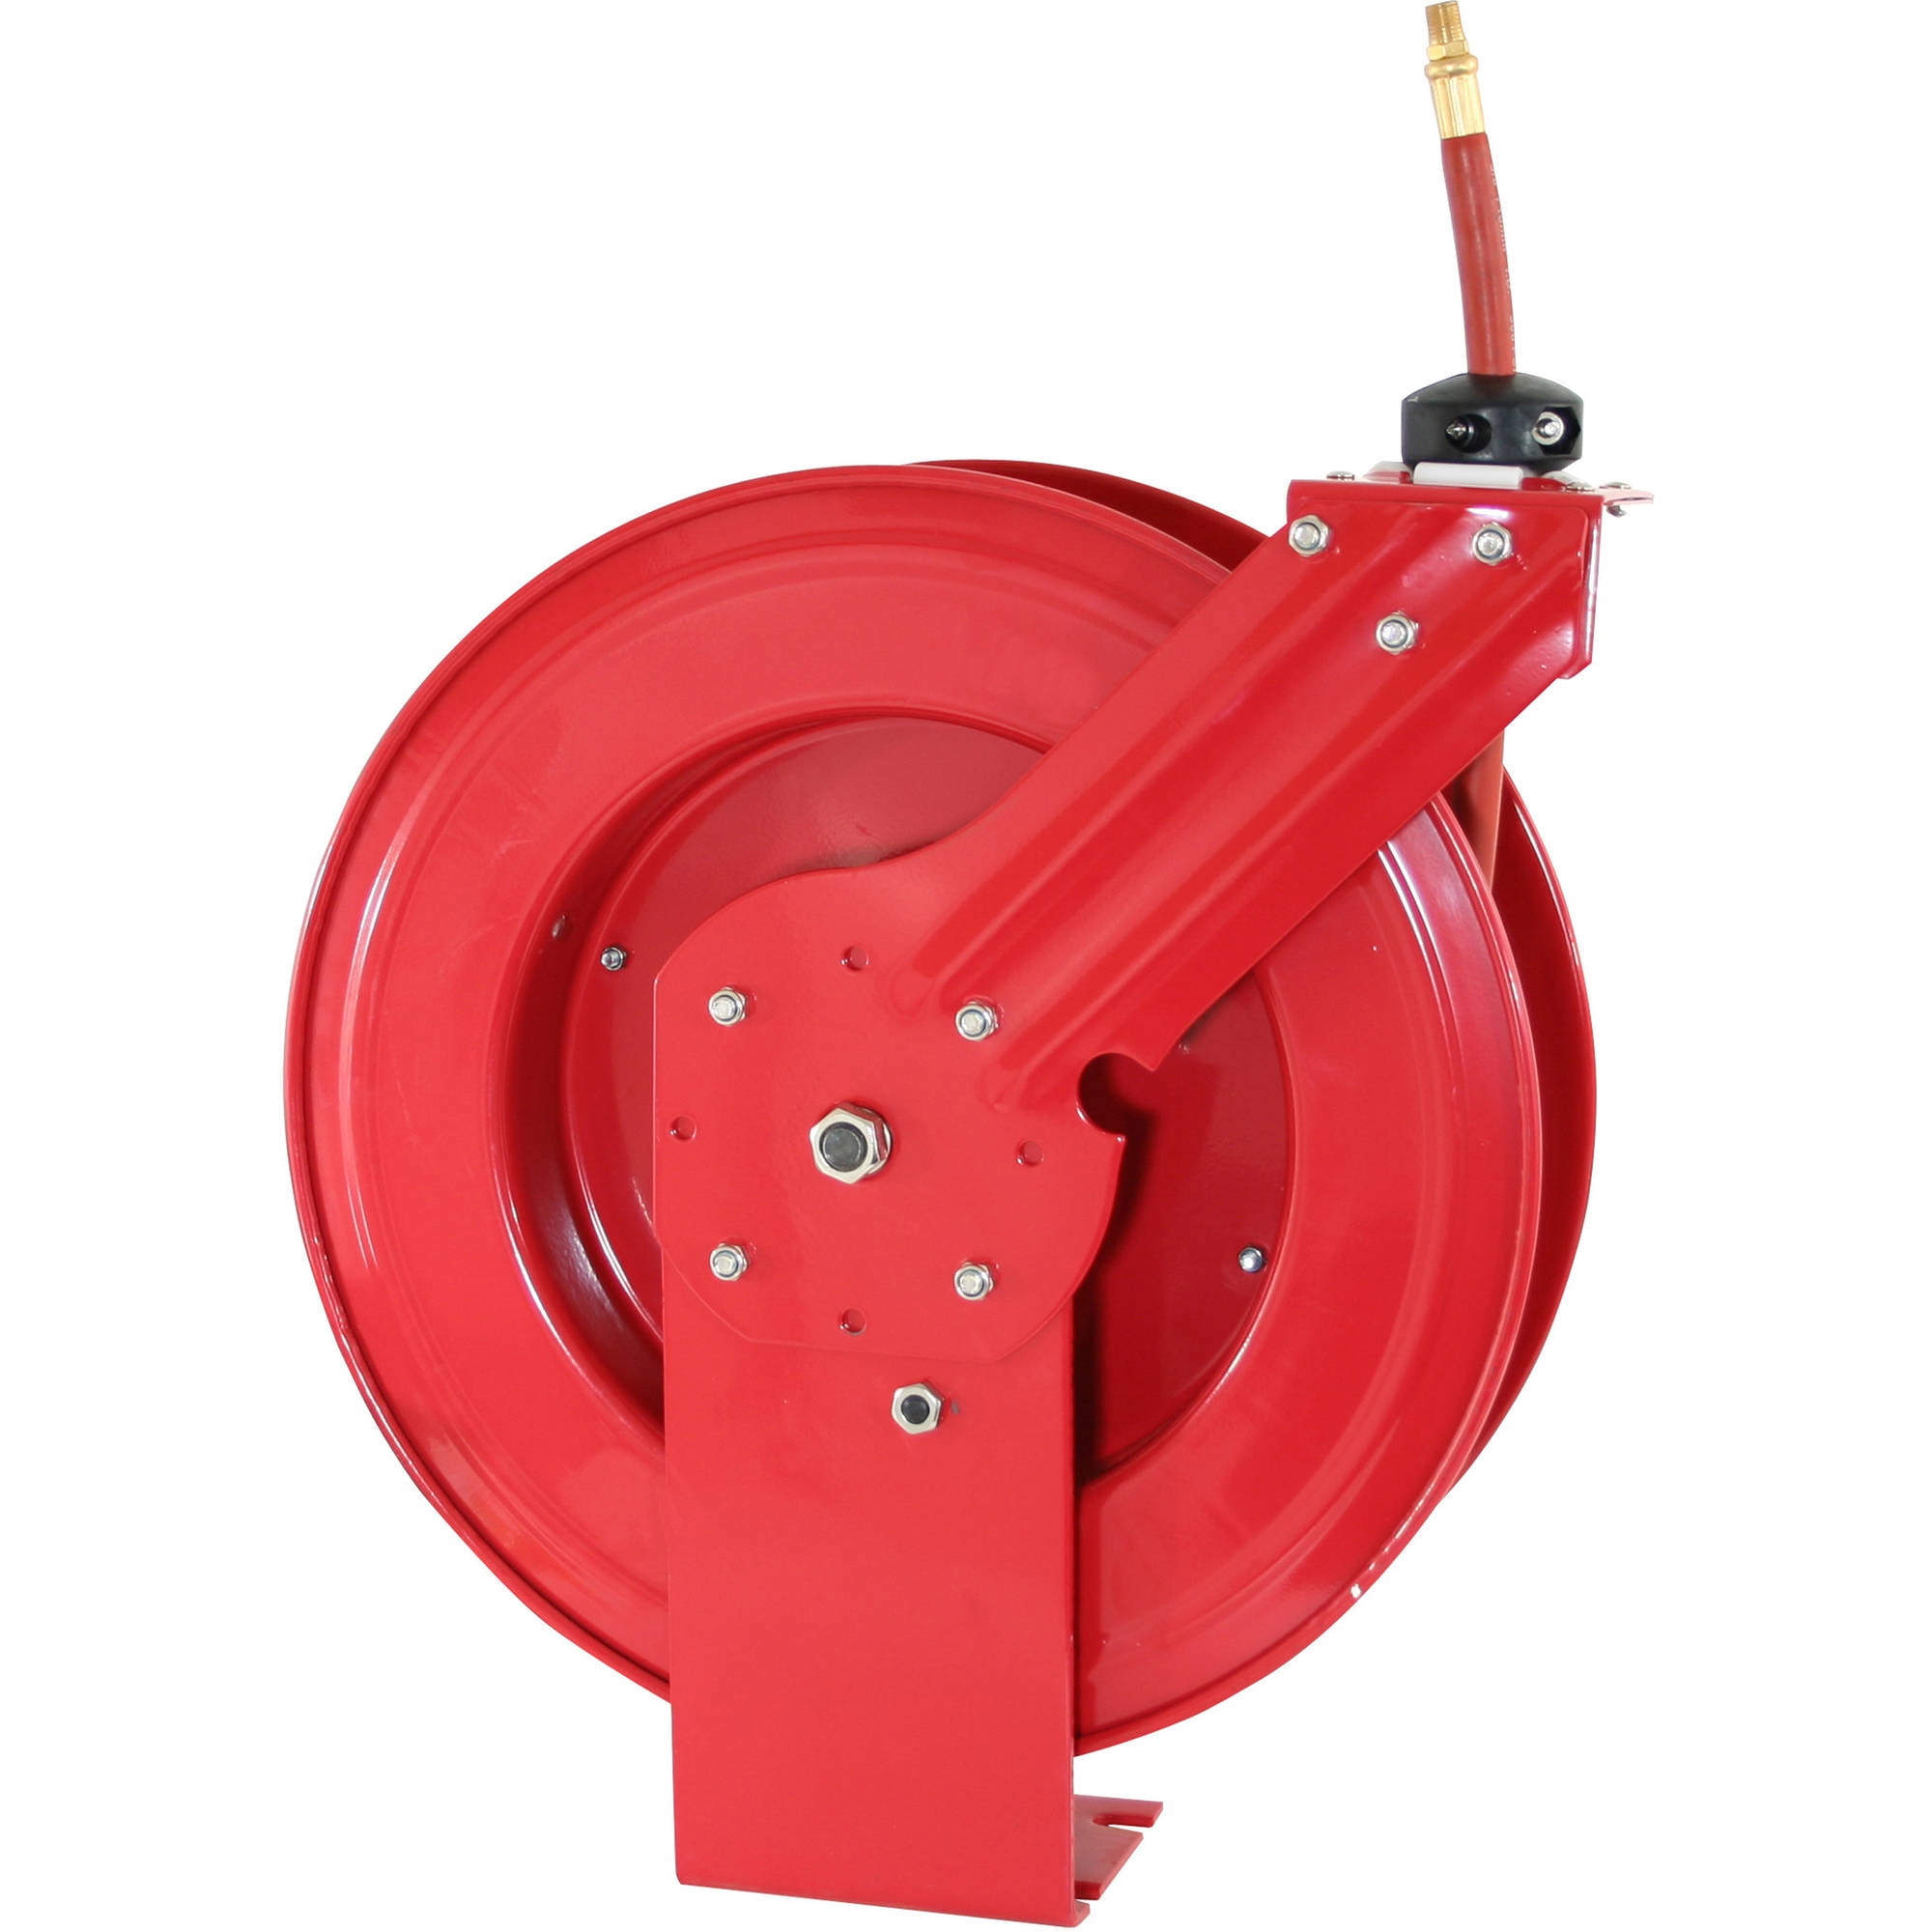 Black Bull 50 Foot Retractable Air Hose Reel with Auto Rewind